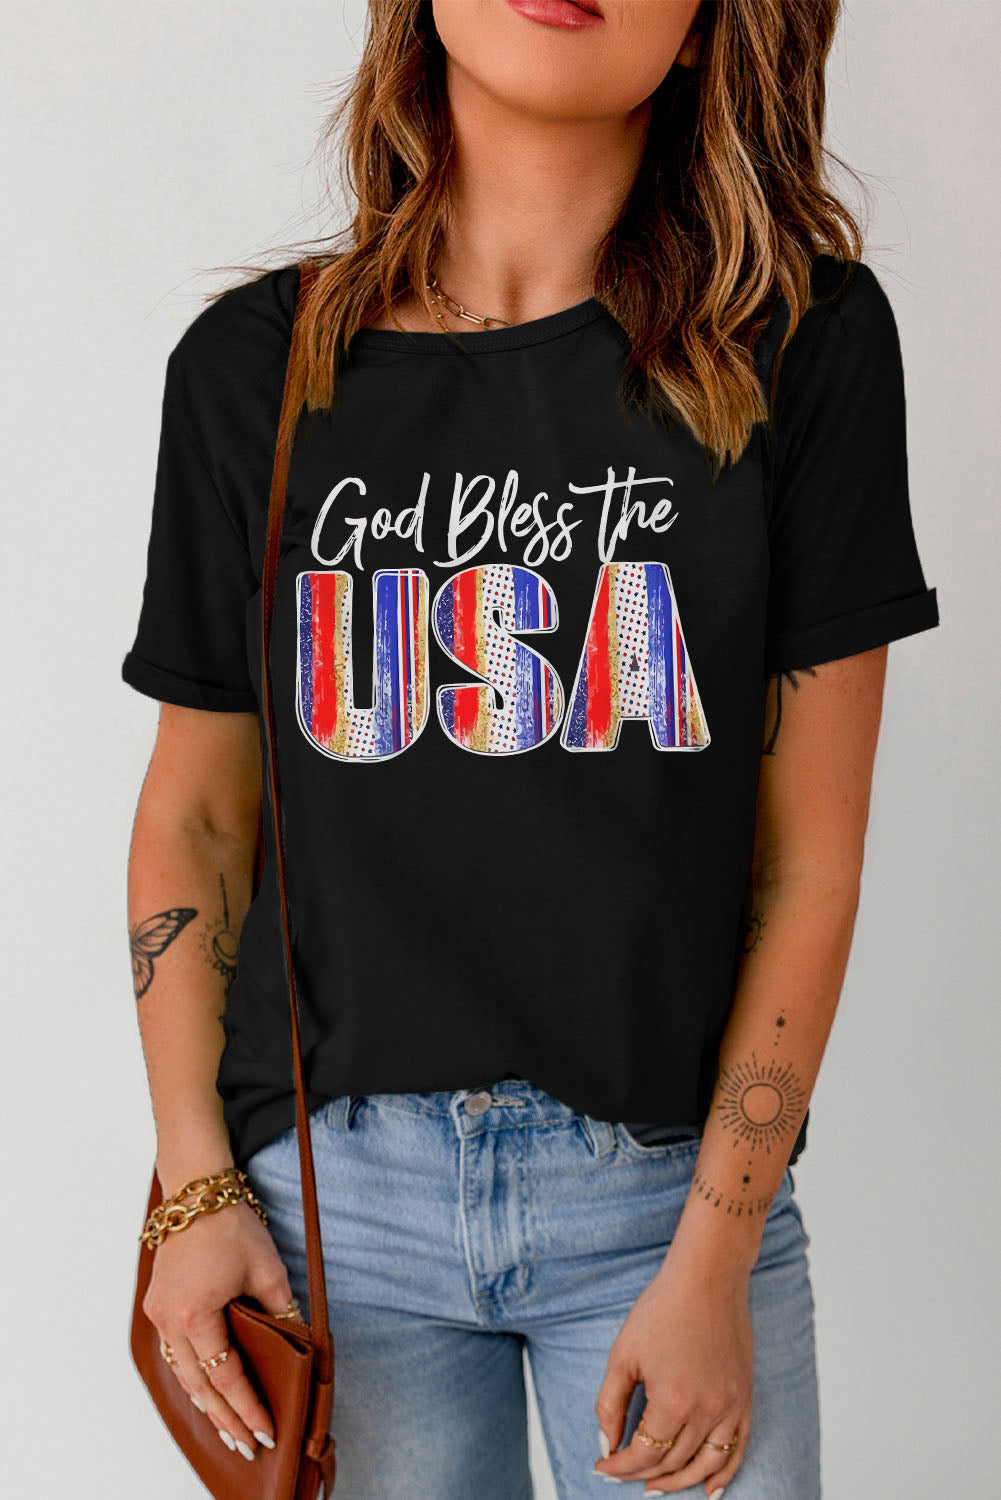 GOD BLESS THE USA Graphic Top American Cuffed Short Sleeve Patriotic Shirt